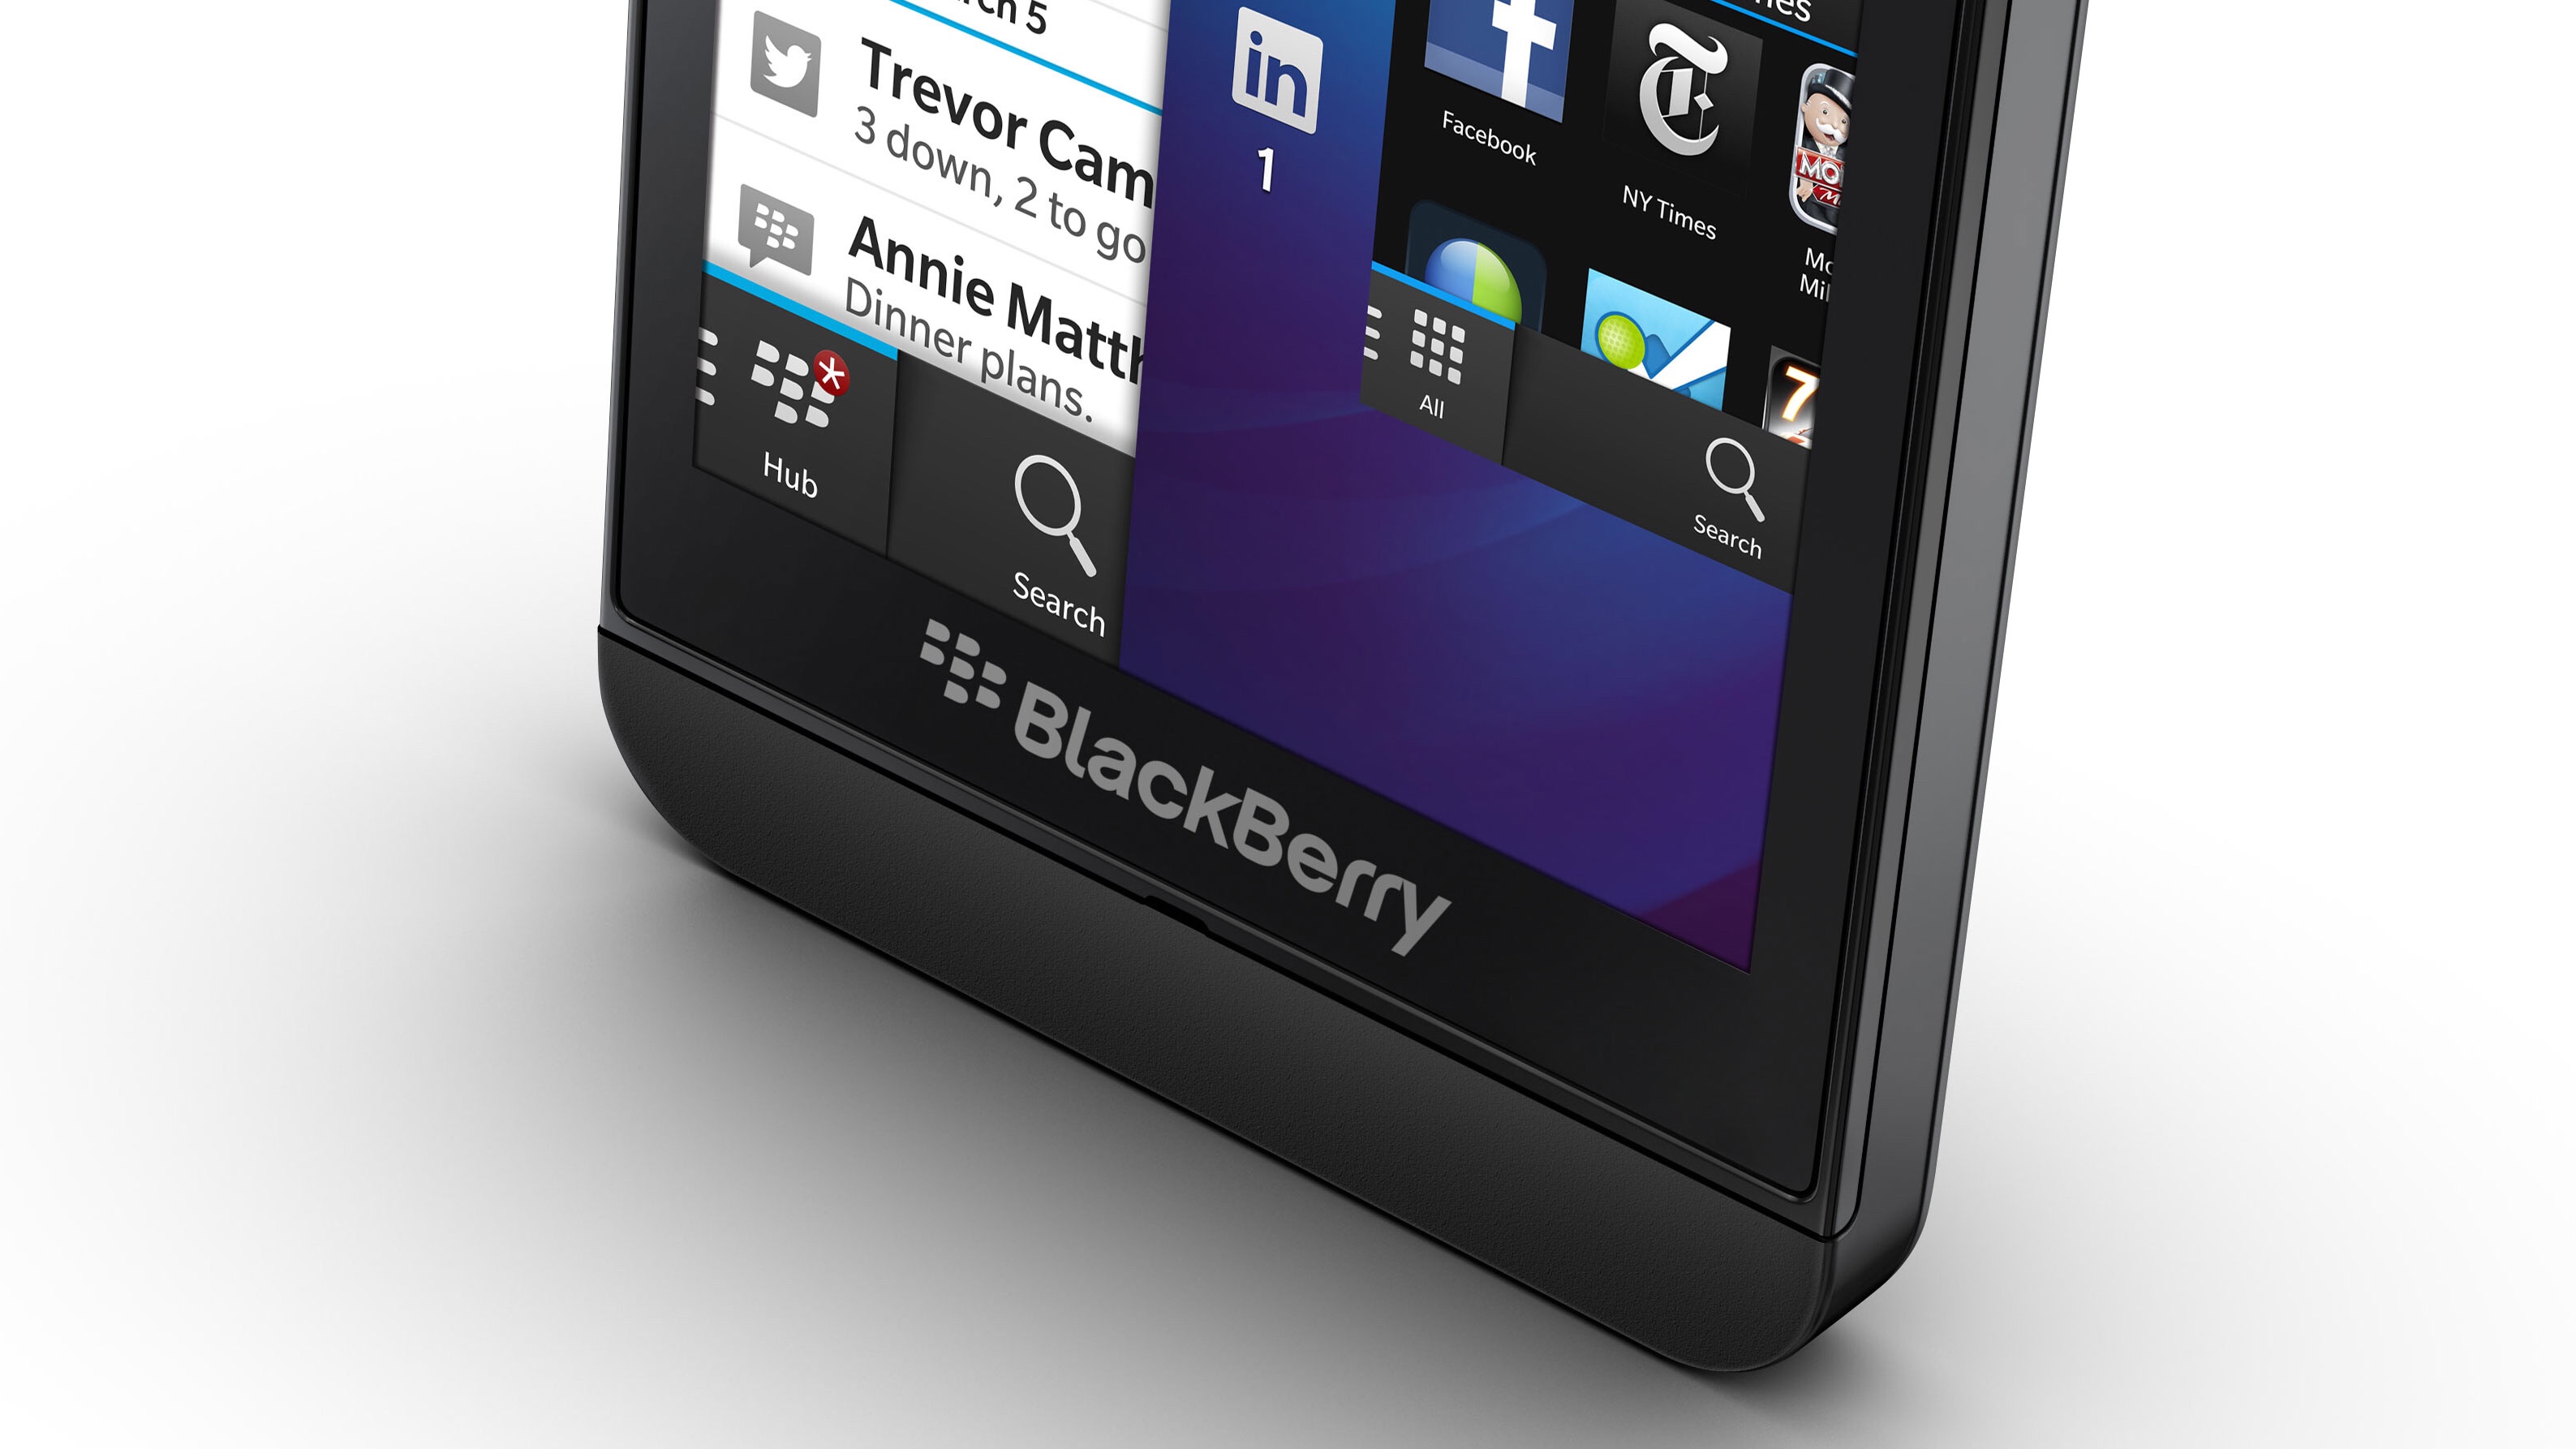 BlackBerry announced at least two more years of support for BB10